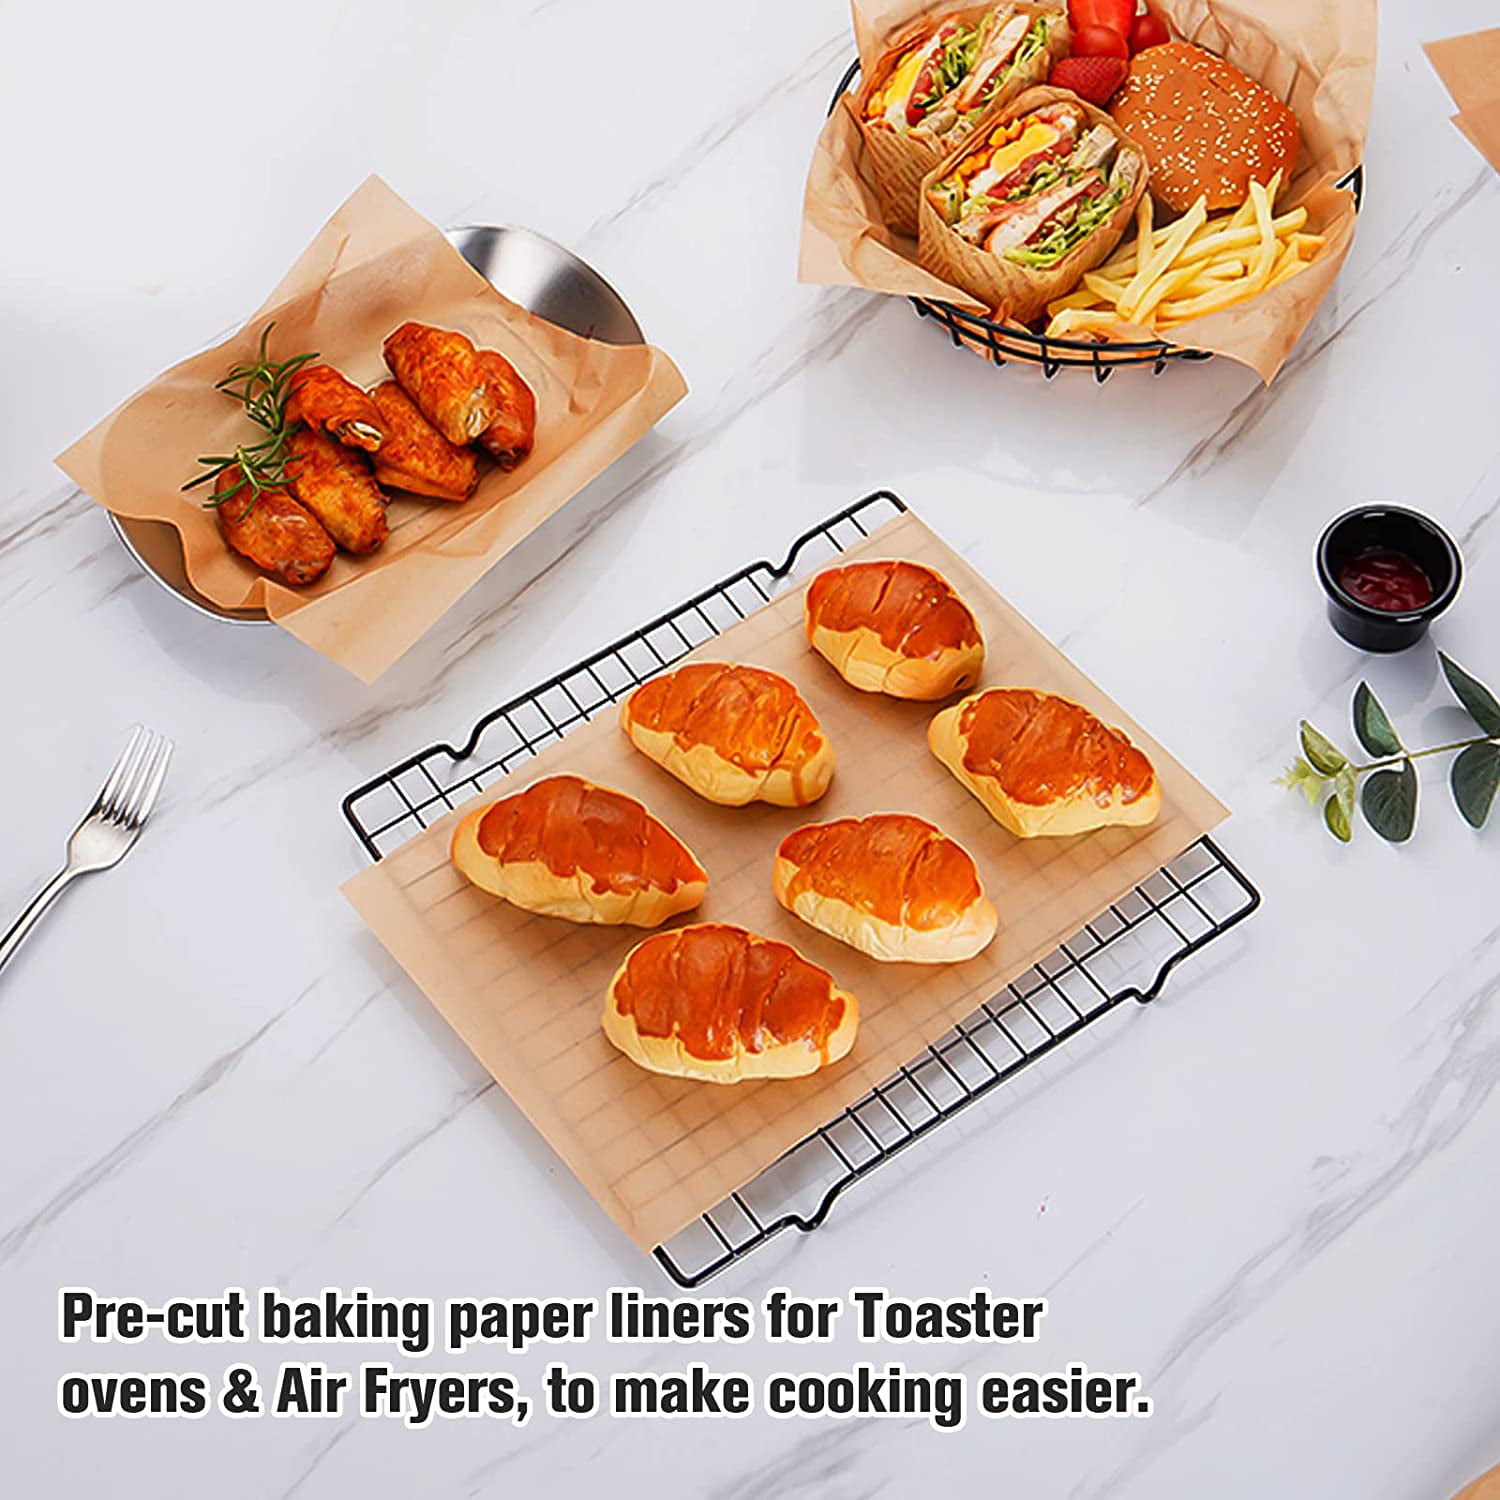 100-Piece Parchment Paper Baking Sheets 7.9x11.8, Precut Non-Stick  Parchment Sheets for Baking, Cooking, Grilling, Air Fryer and Steaming 